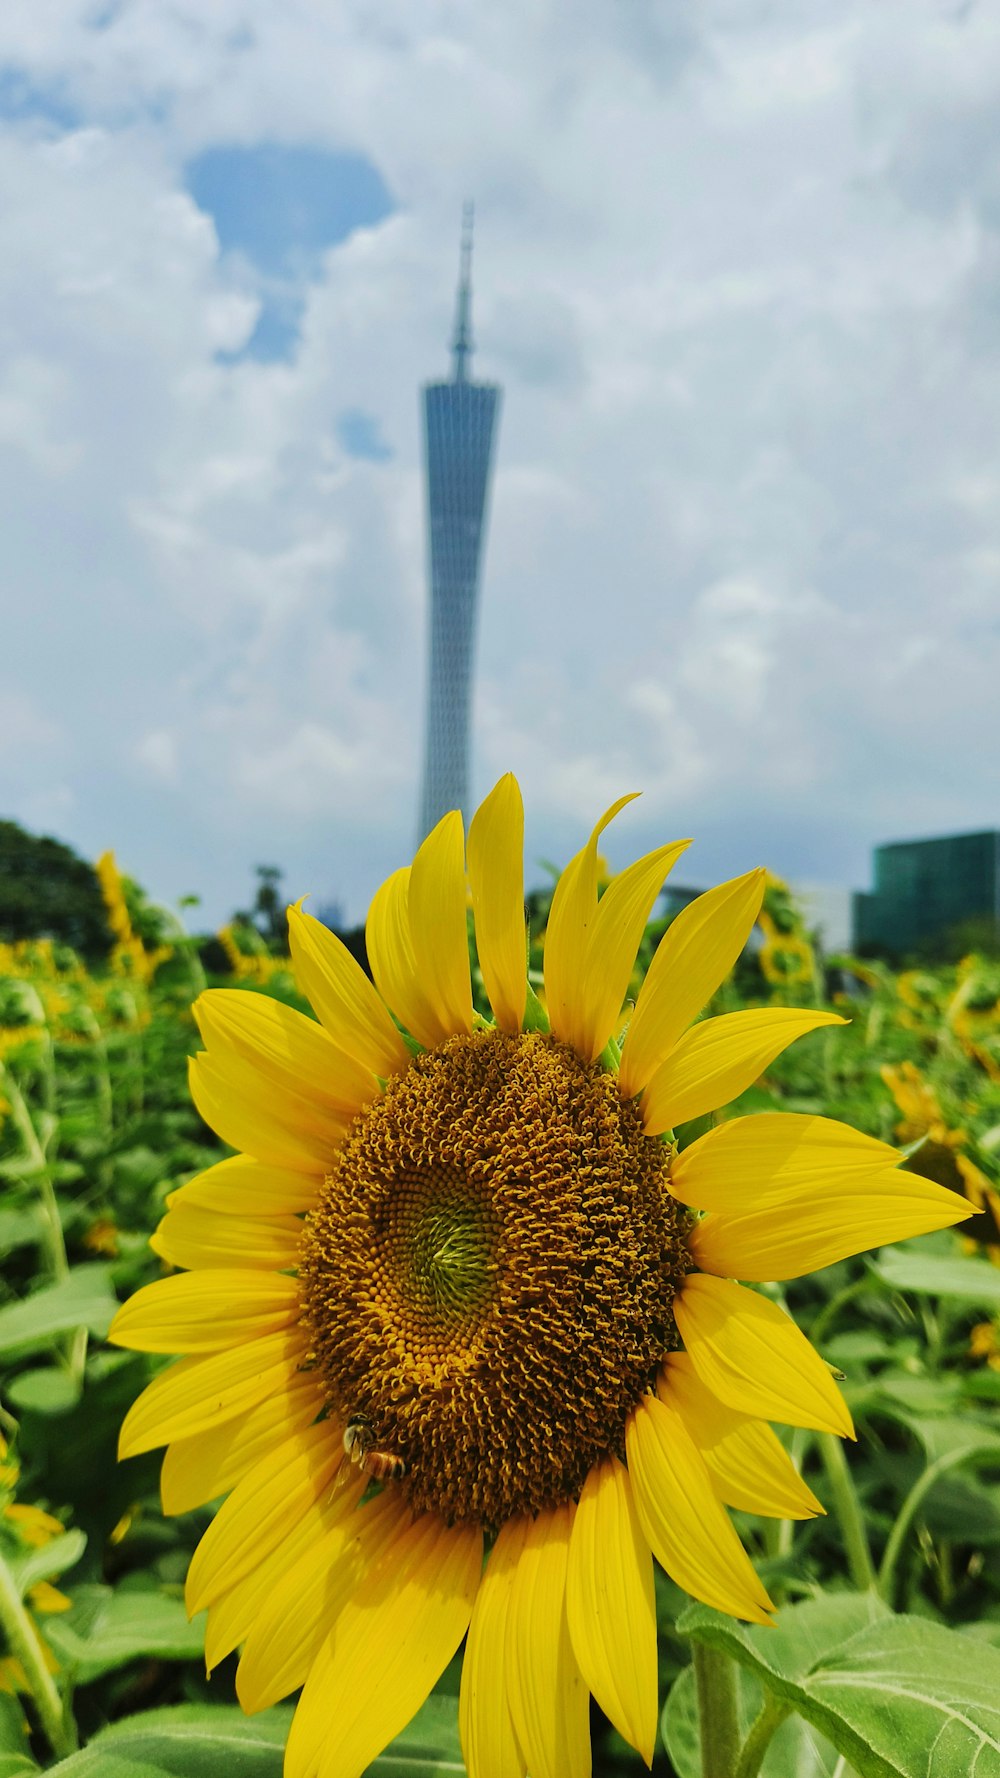 a large sunflower in a field with a tall building in the background